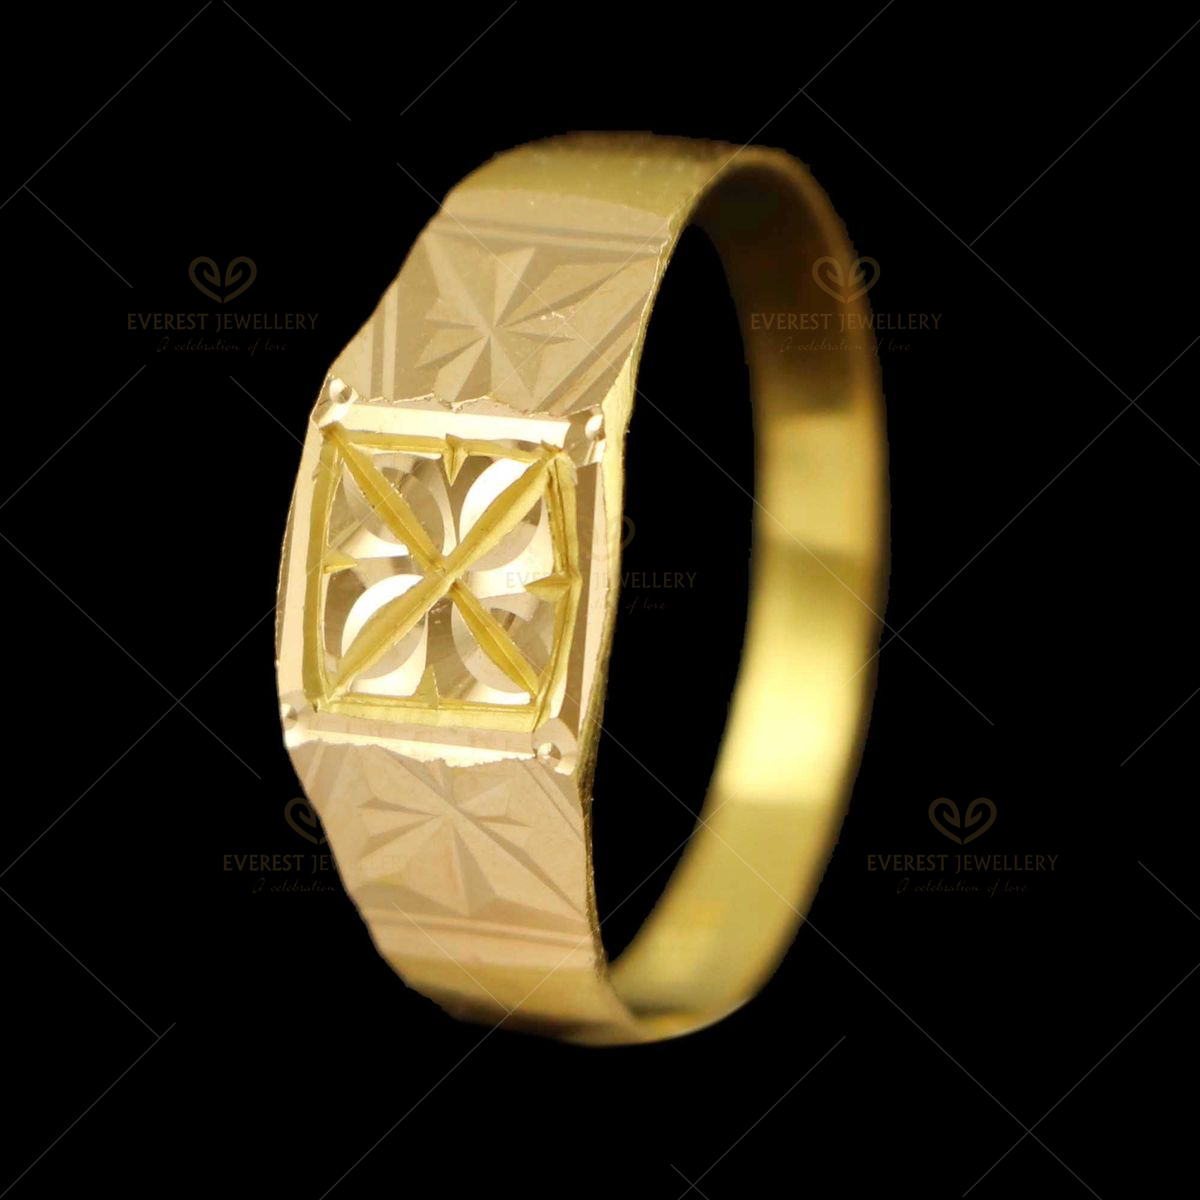 Latest Light 22k Gold Ring Designs with Weight and Price 2021  @LIFESTYLEGOLD - YouTube